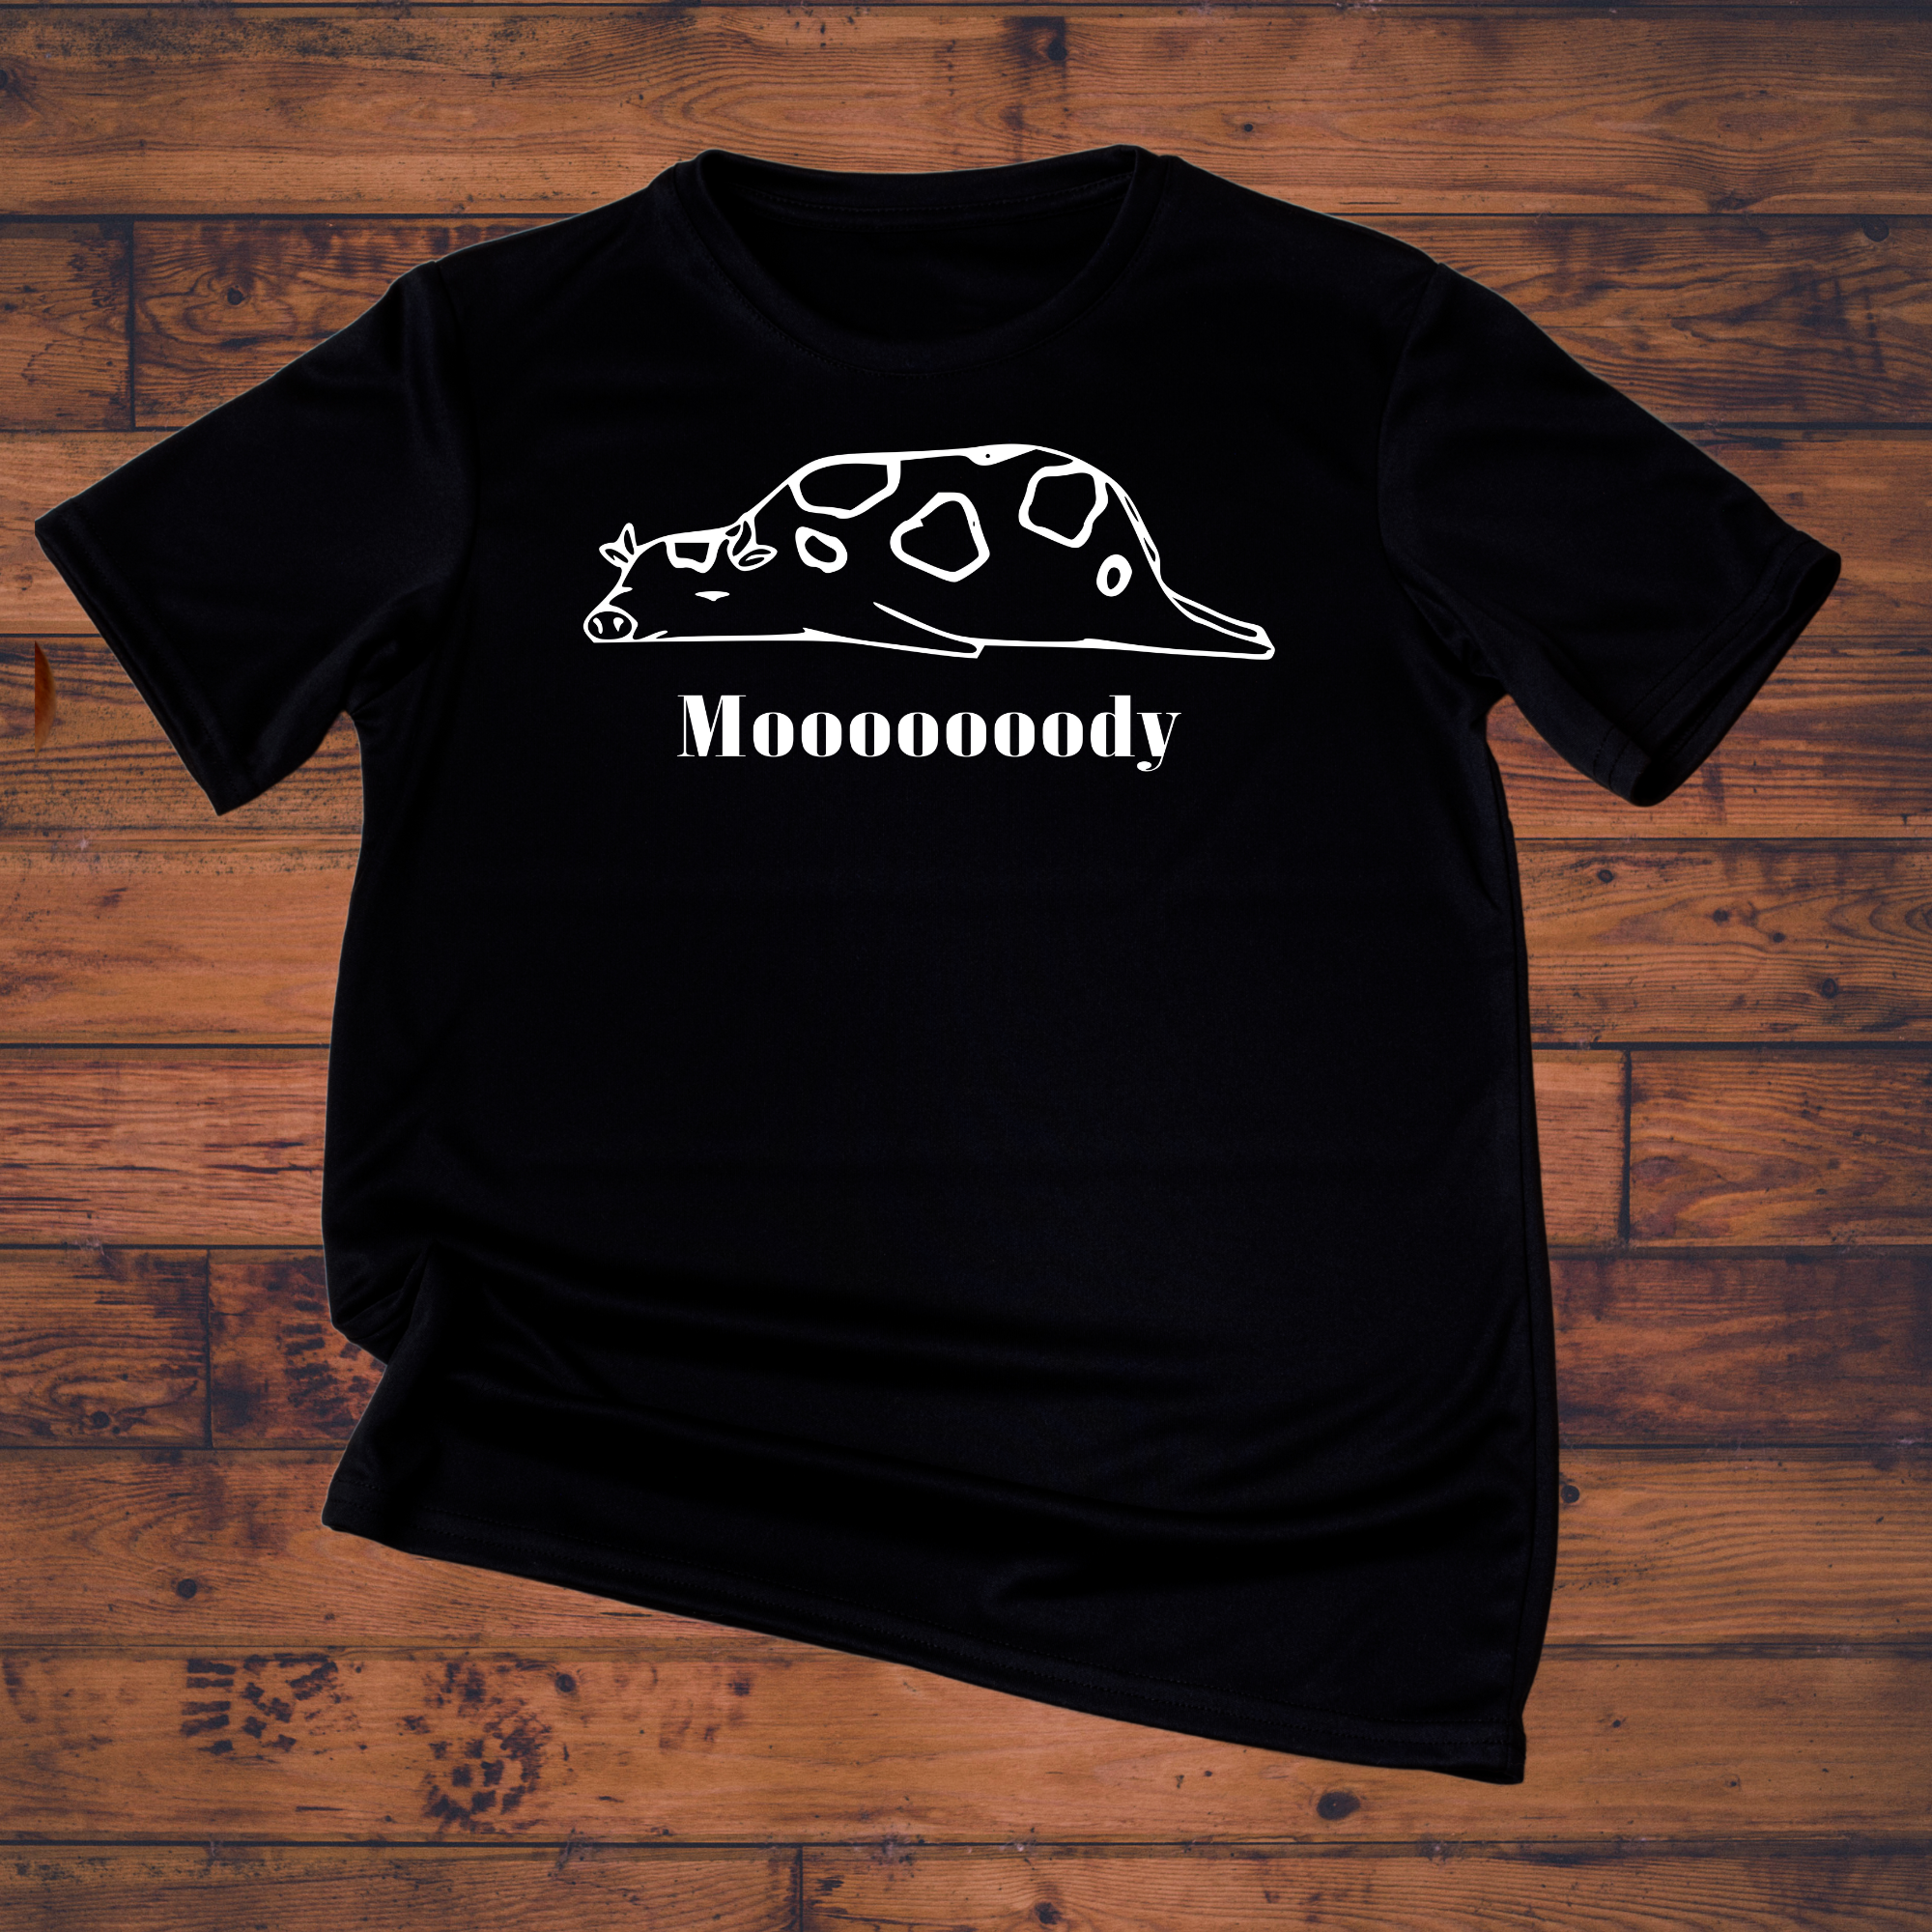 Punny Tee |Mooody Cow | Funny T-Shirt